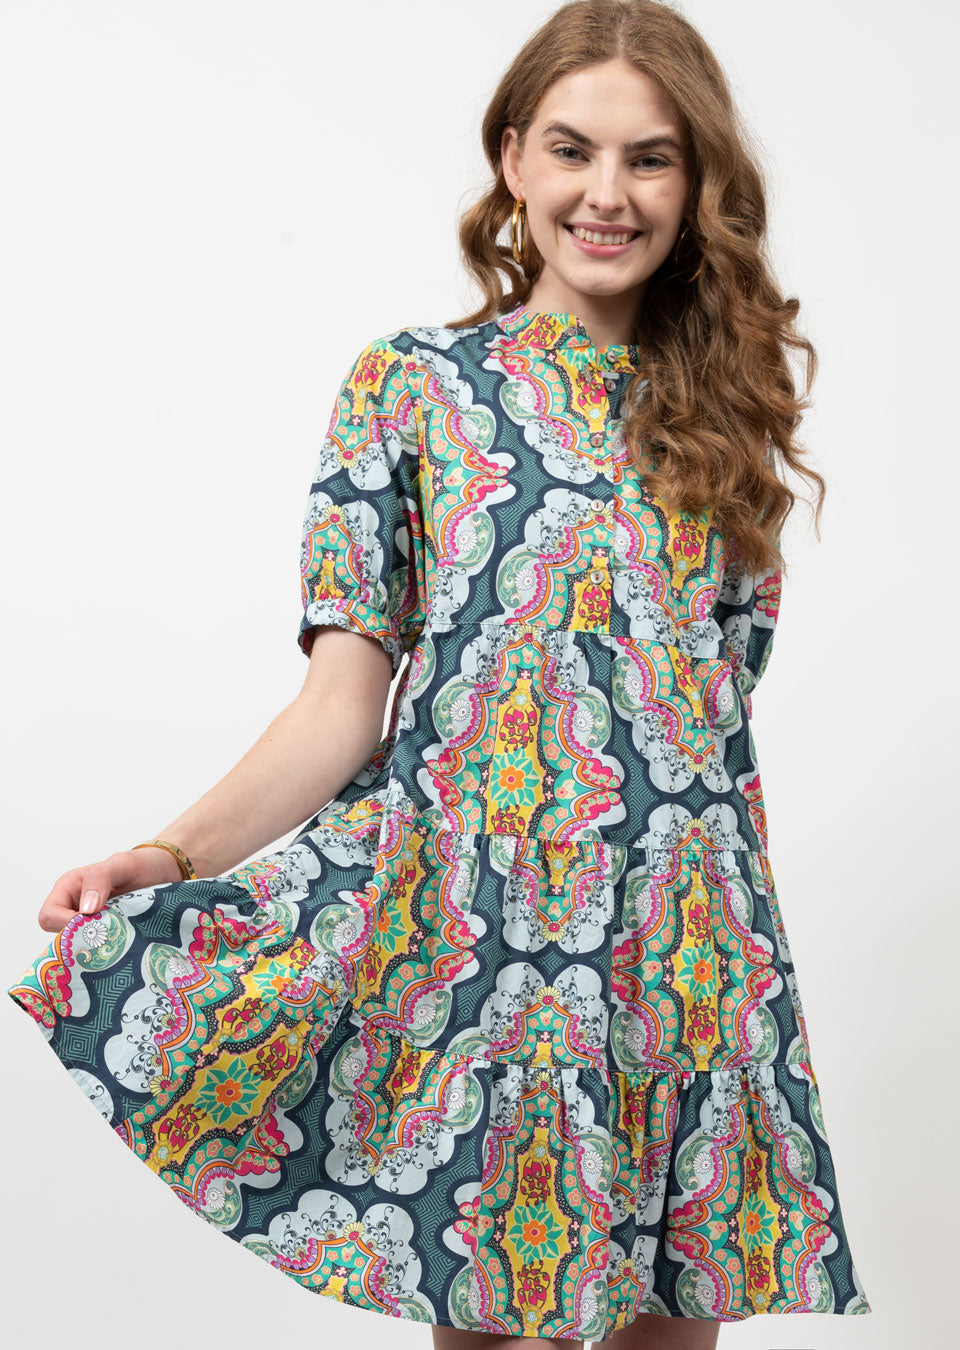 UNCLE FRANK SHORT-SLEEVE TIERED DRESS - NAVY MULTI - 74504